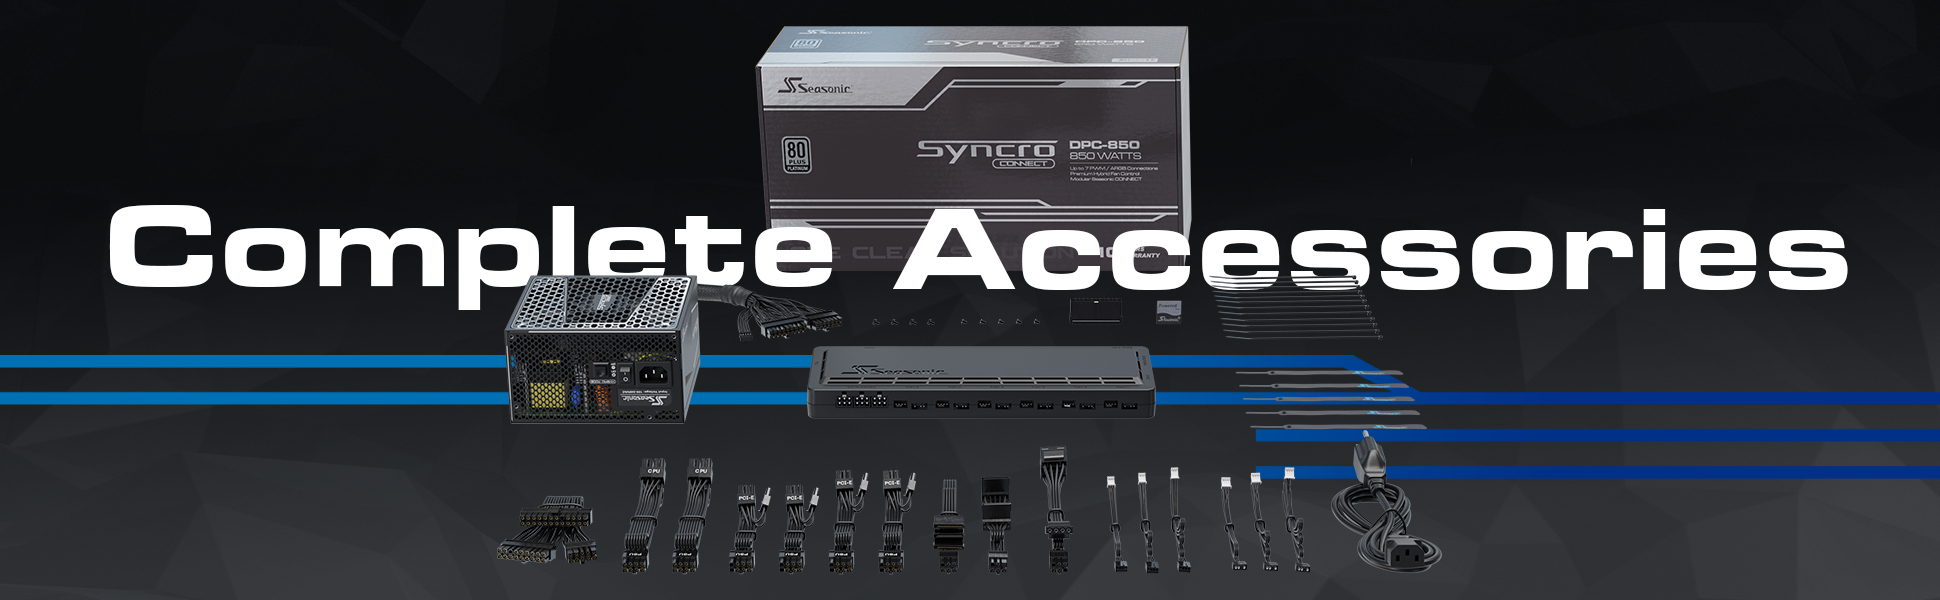 SYNCRO PSU with CONNECT Module